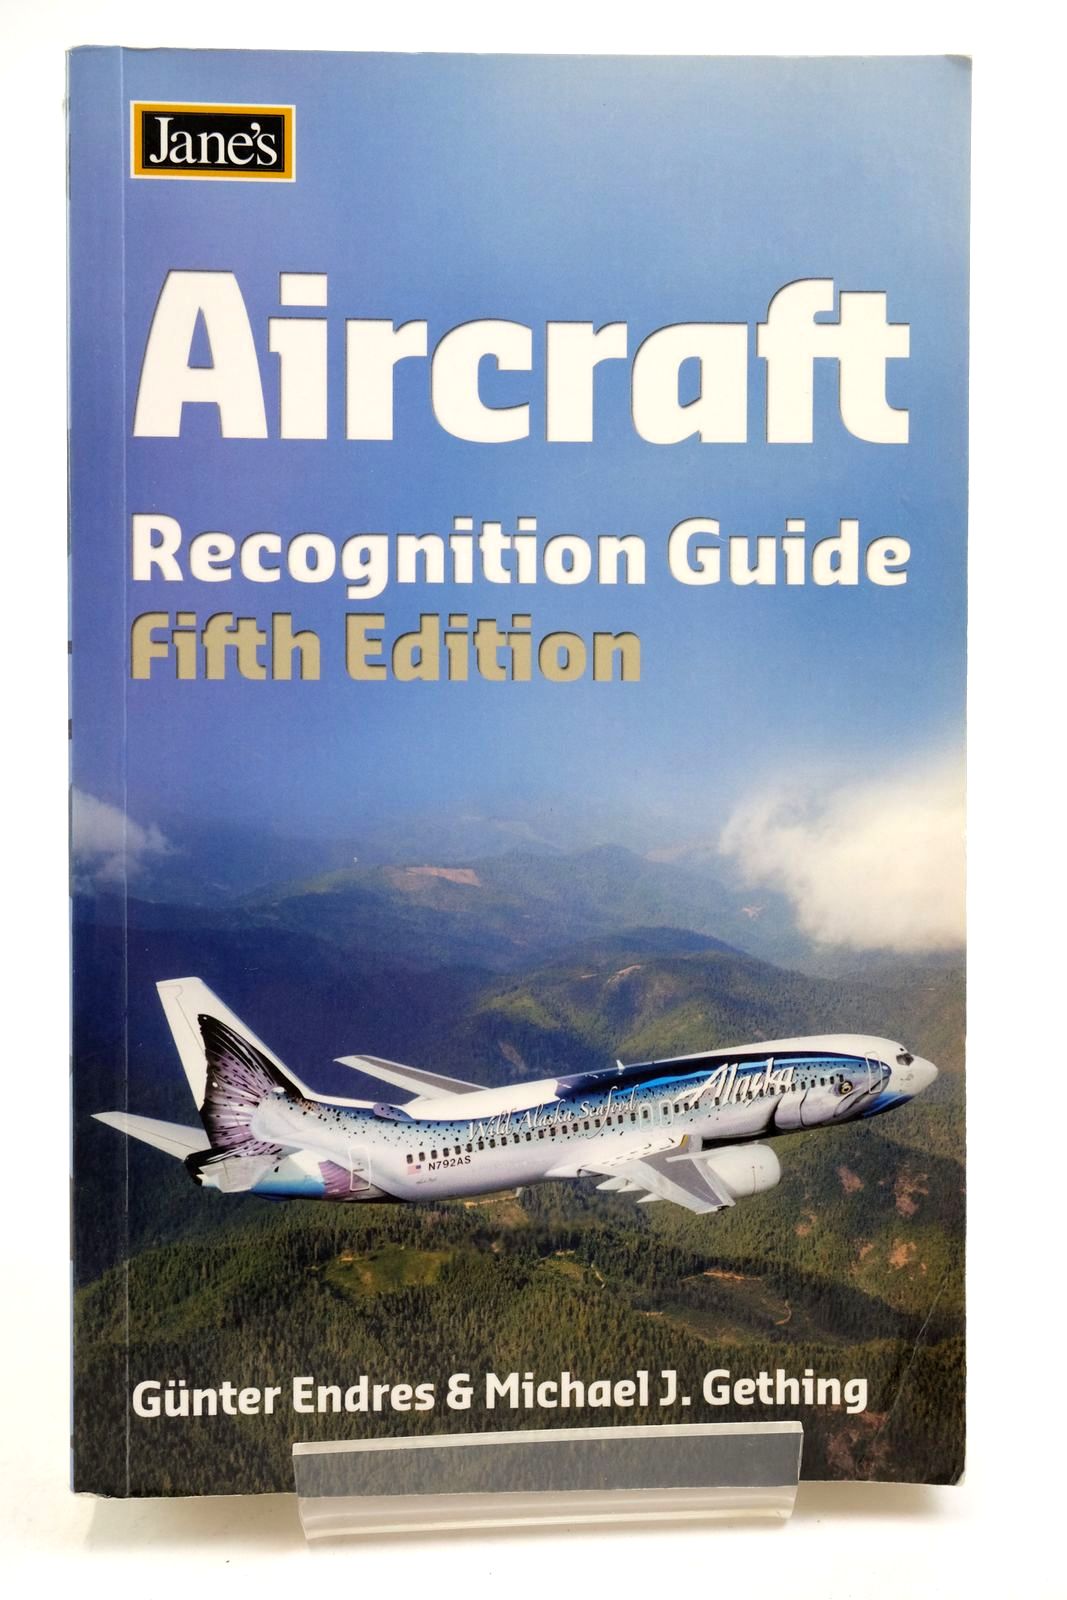 Photo of JANE'S AIRCRAFT RECOGNITION GUIDE written by Endres, Gunter Gething, Michael J. published by Collins (STOCK CODE: 2139580)  for sale by Stella & Rose's Books